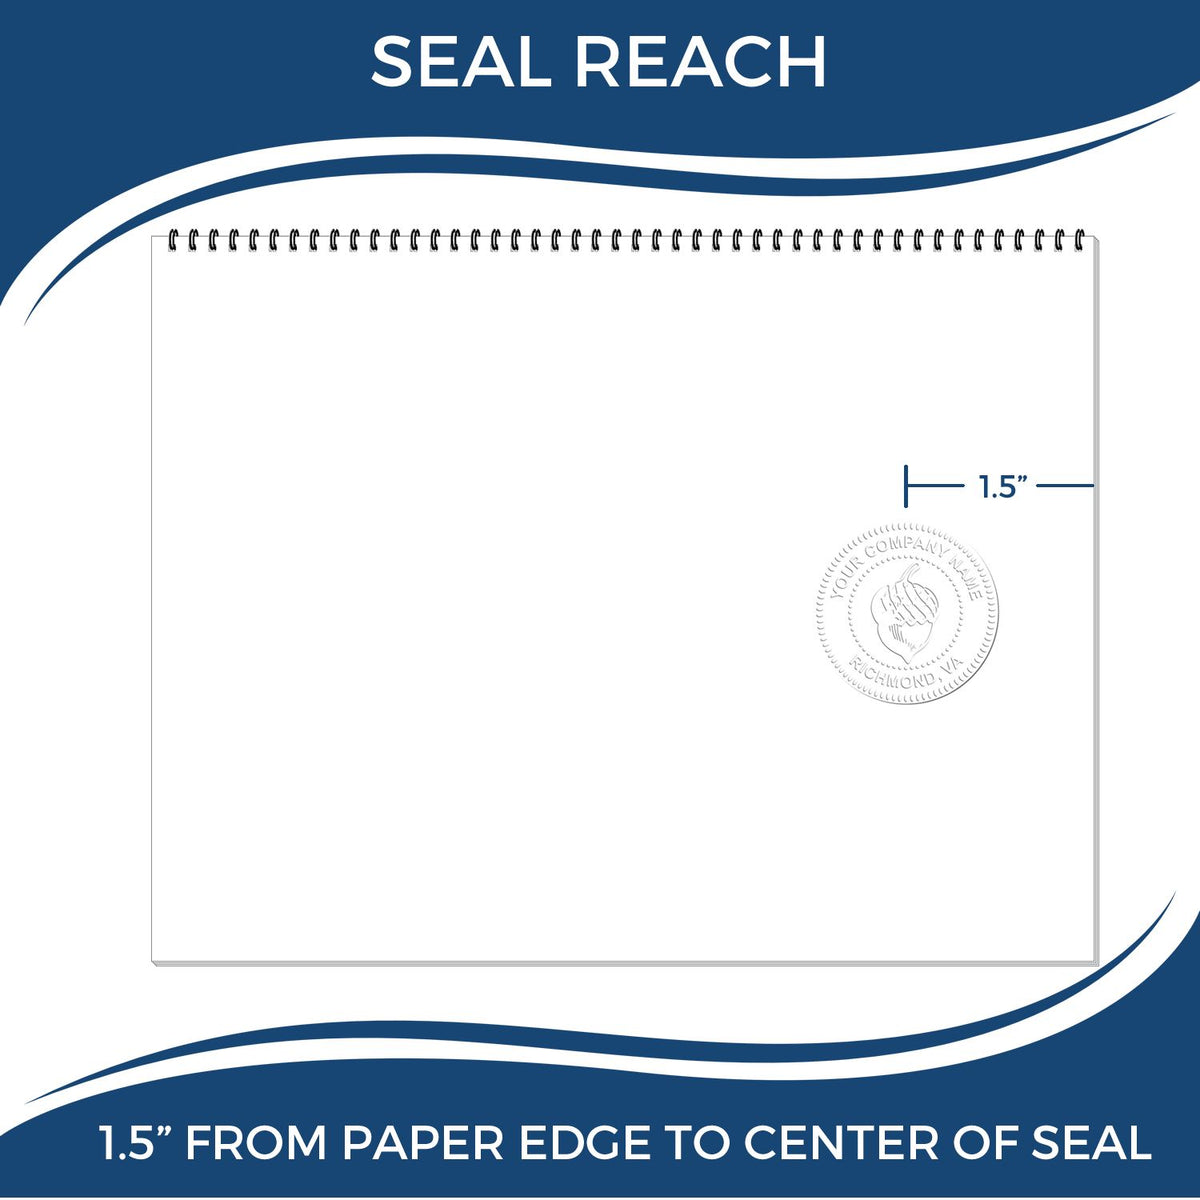 An infographic showing the seal reach which is represented by a ruler and a miniature seal image of the Ohio Geologist Desk Seal